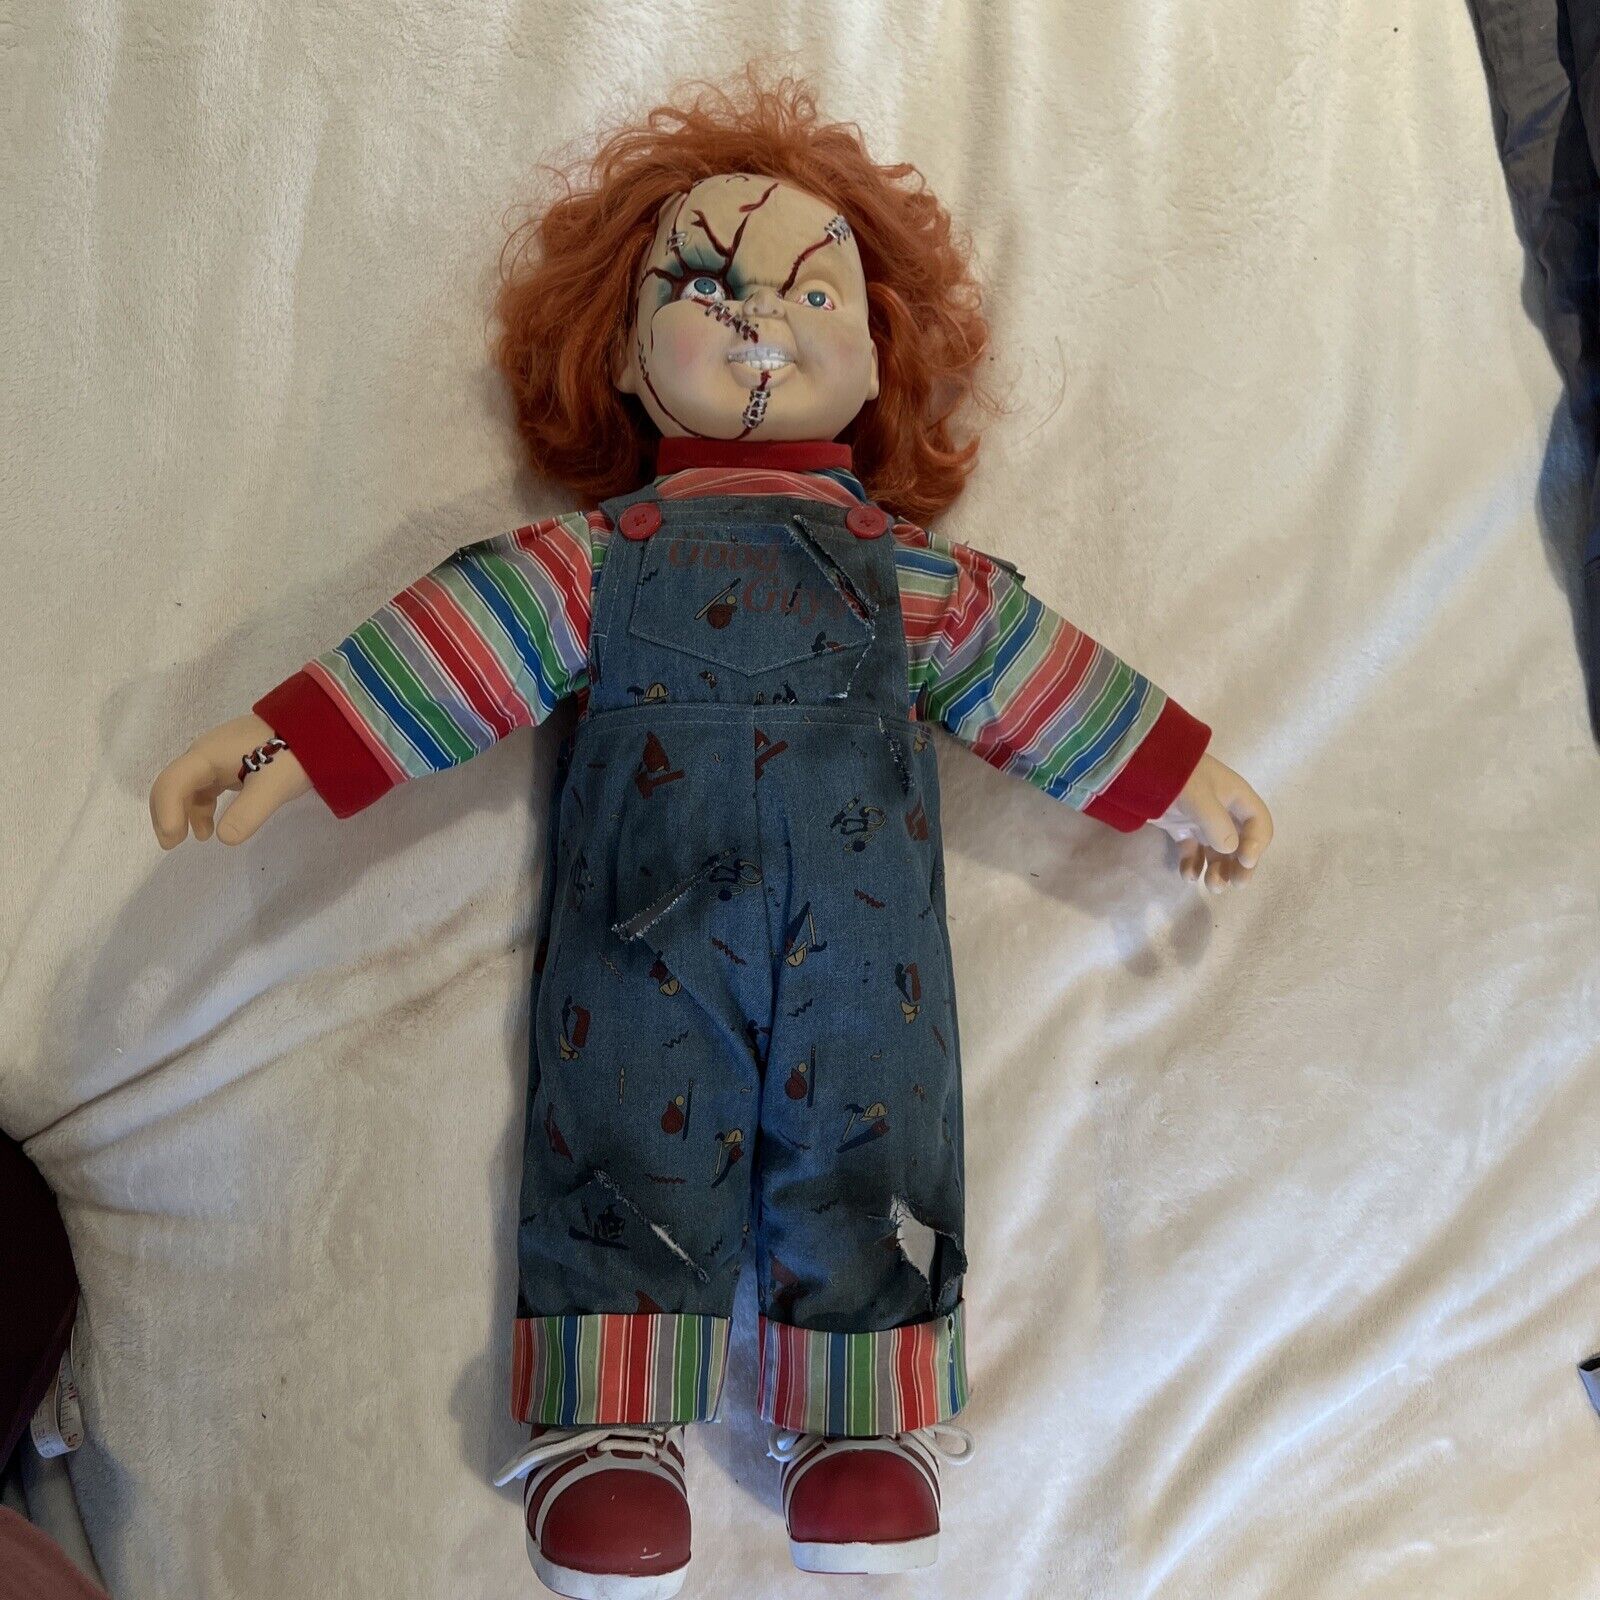 Chucky Bride of Chucky Childs Play 25” Plush Doll with Good Guy